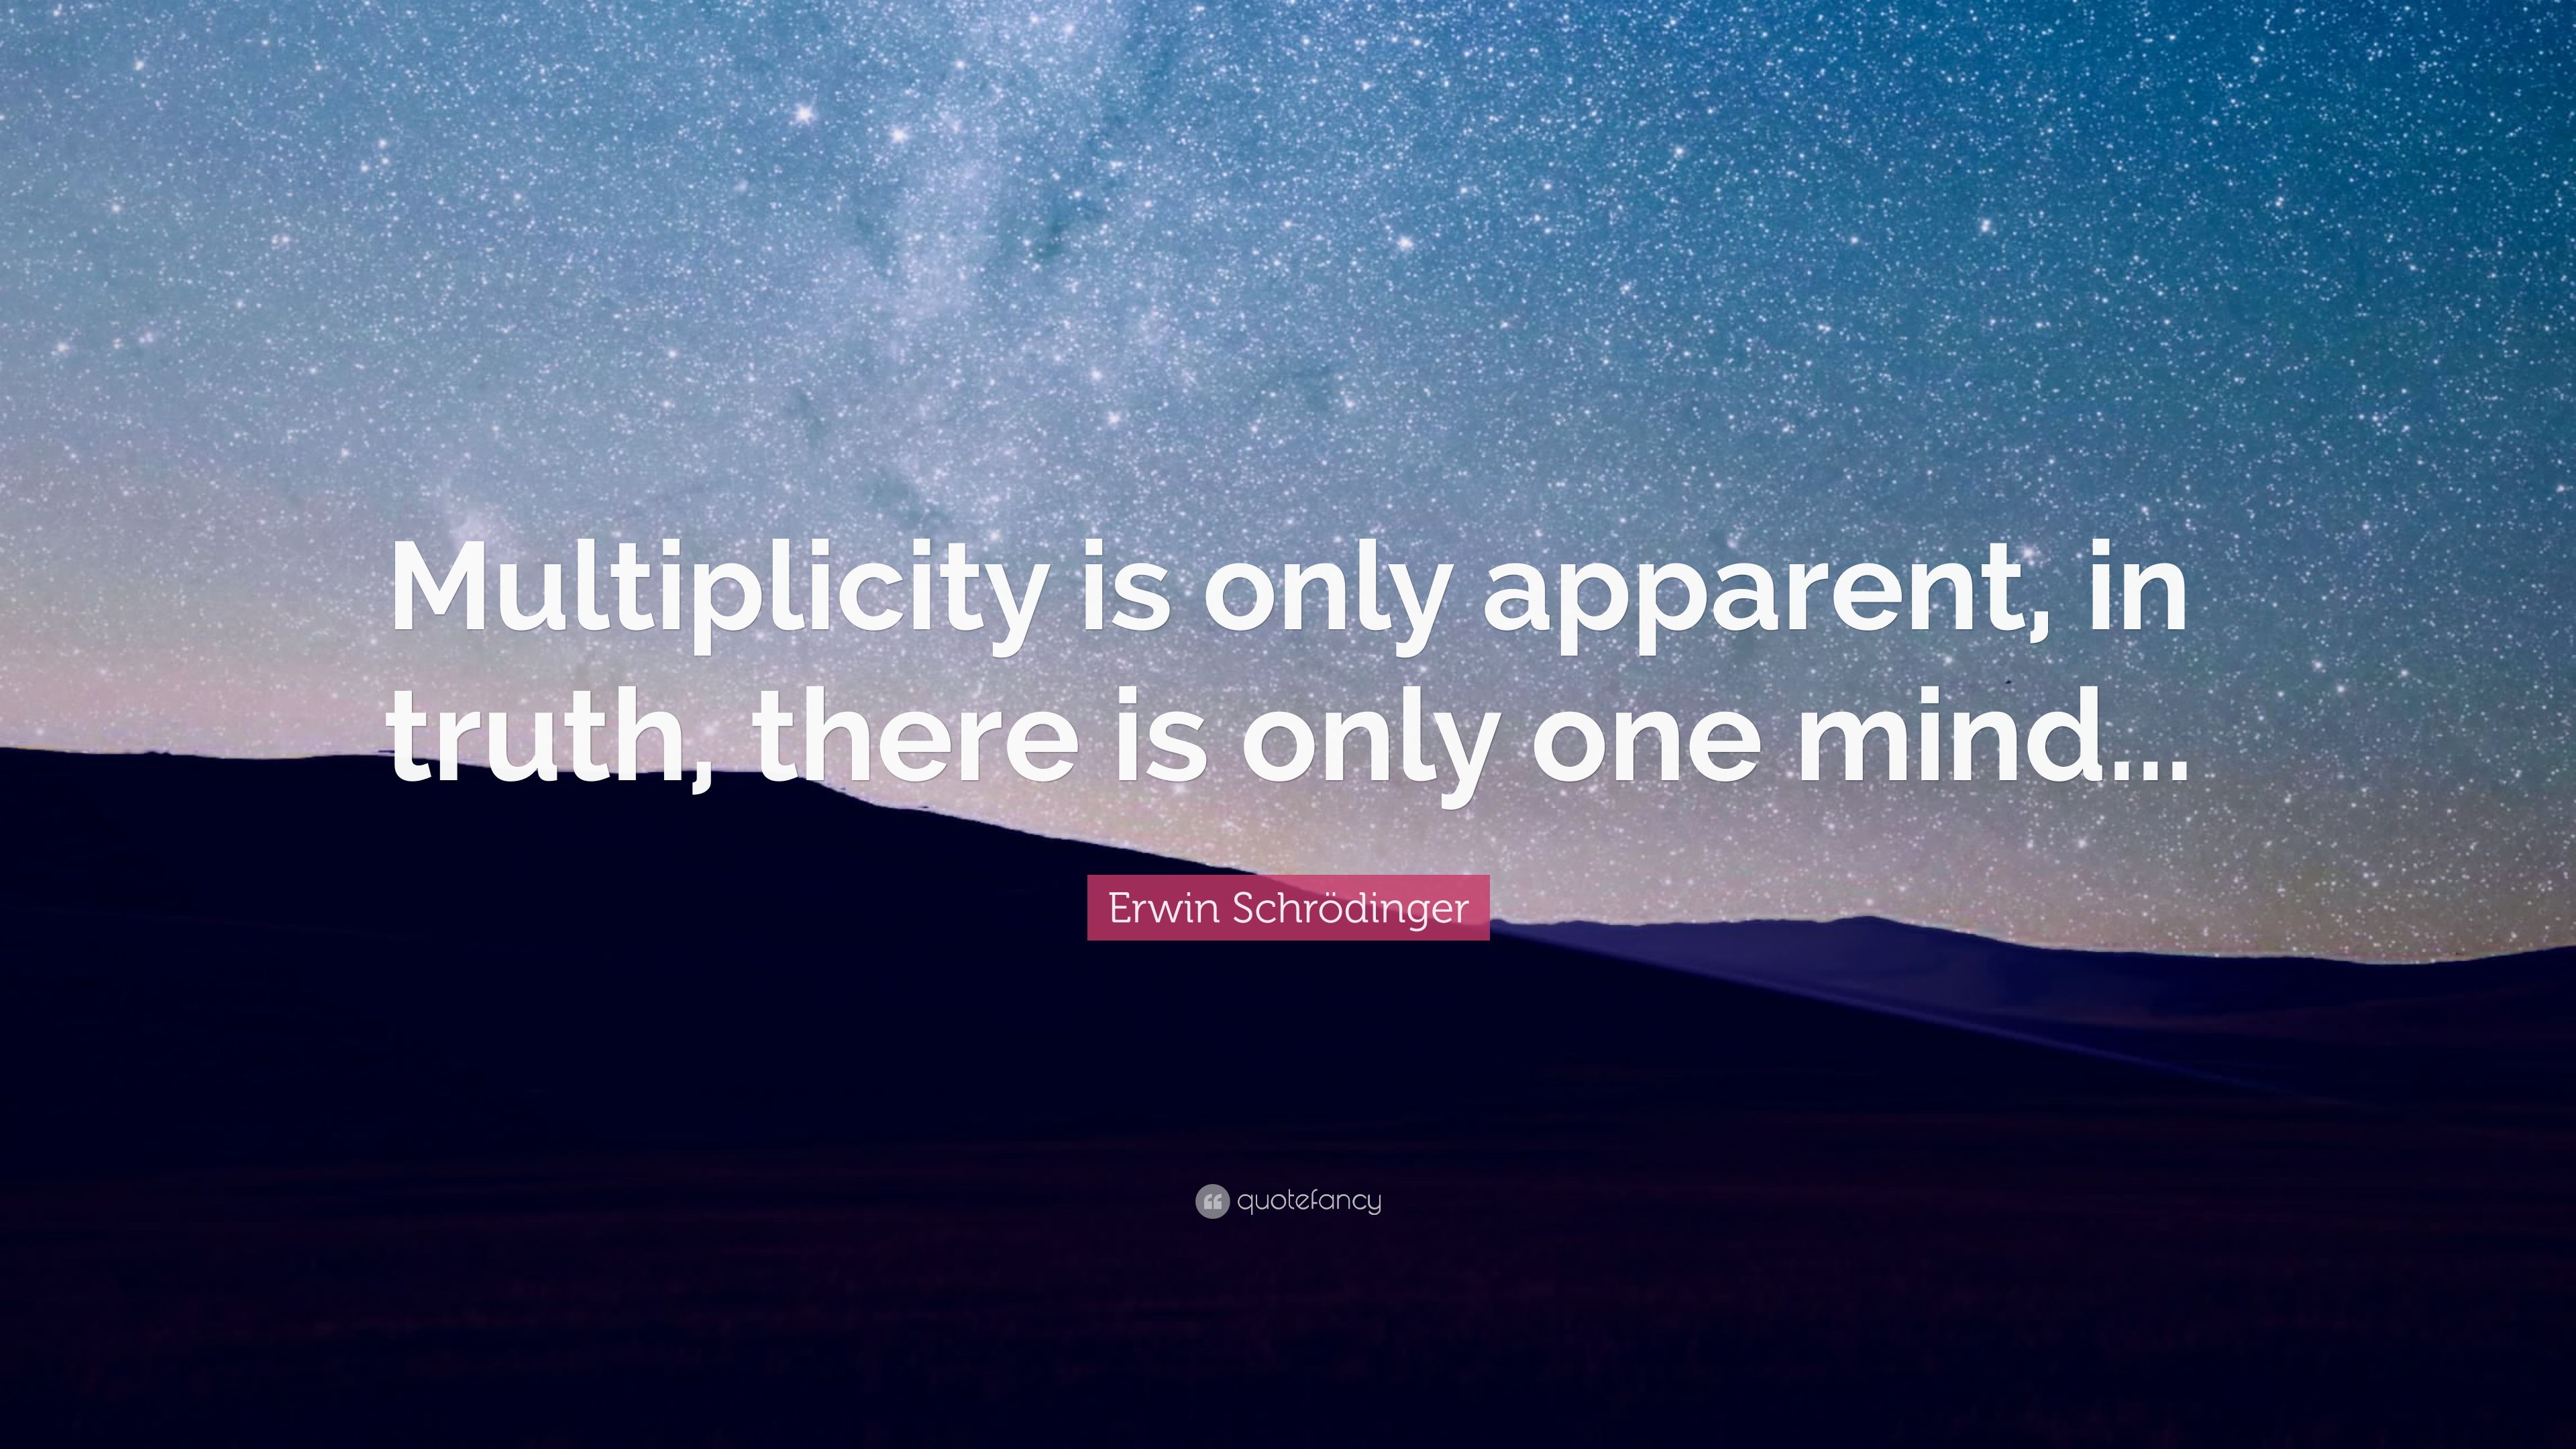 Quote: “Multiplicity is only apparent .quotefancy.com